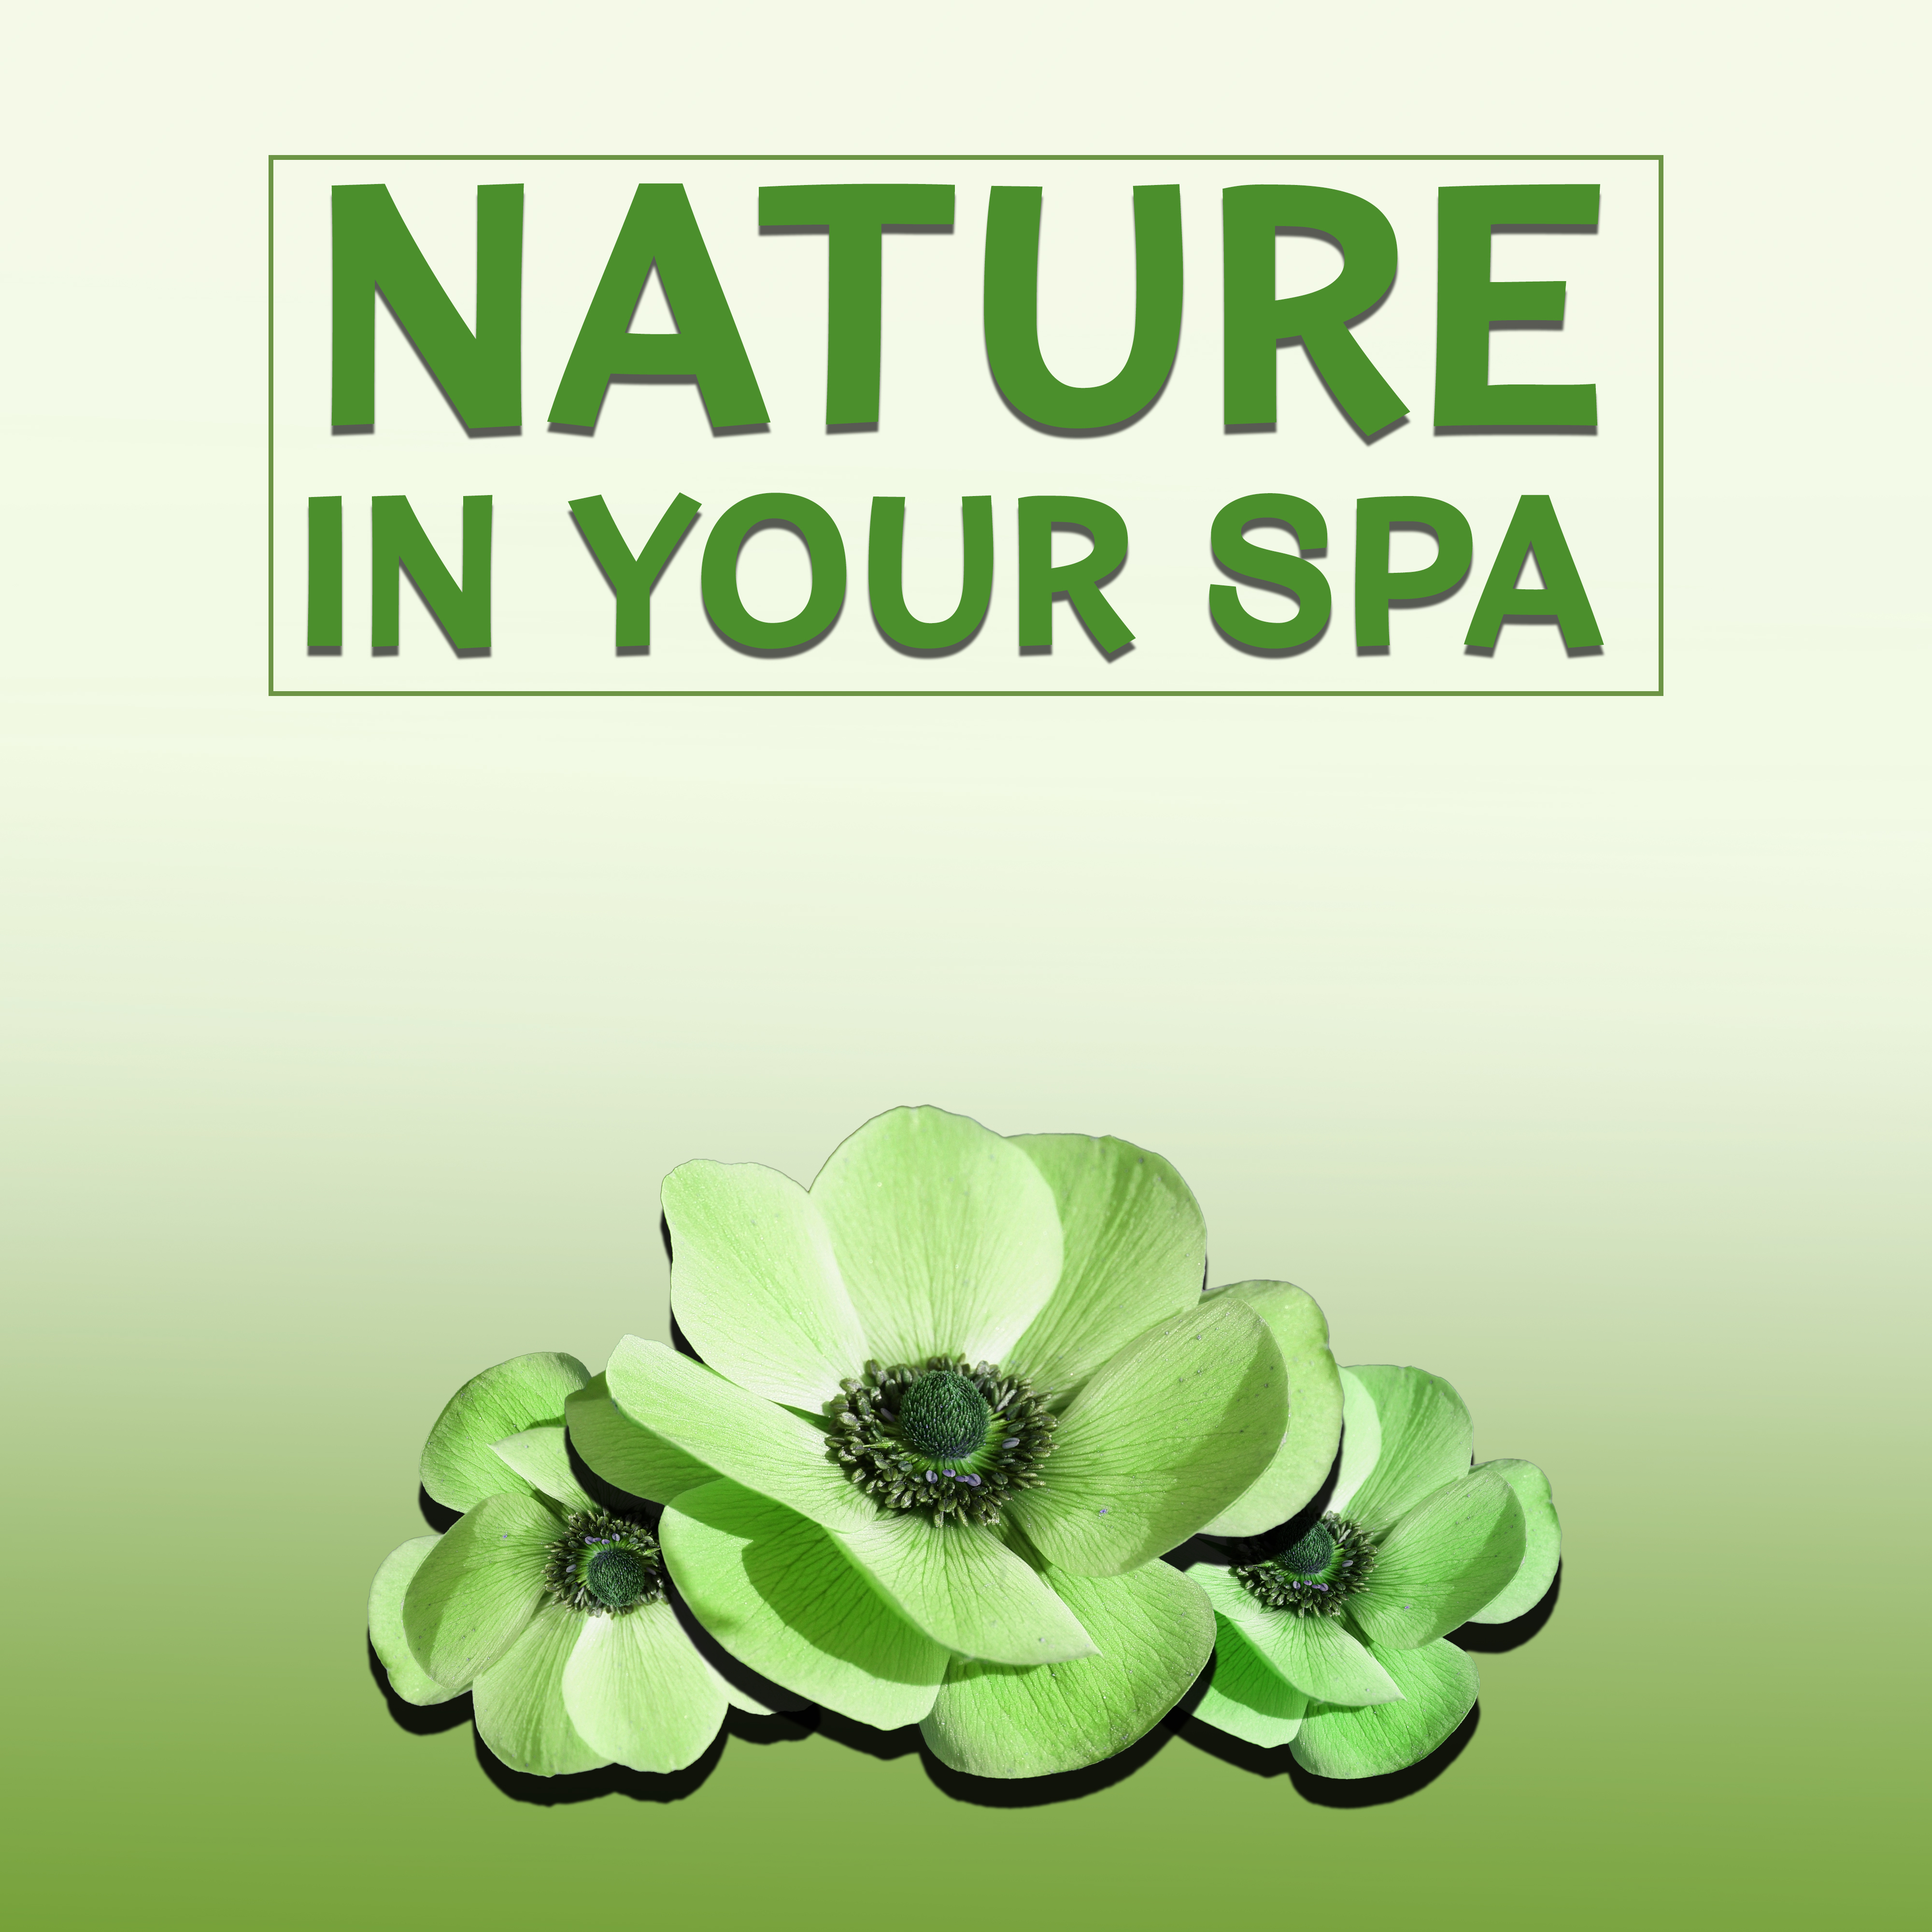 Nature in Your Spa – Relaxation Wellness, Peaceful Music for Massage, Spa, Soothing Piano, Nature Sounds to Rest, Spa Dreams